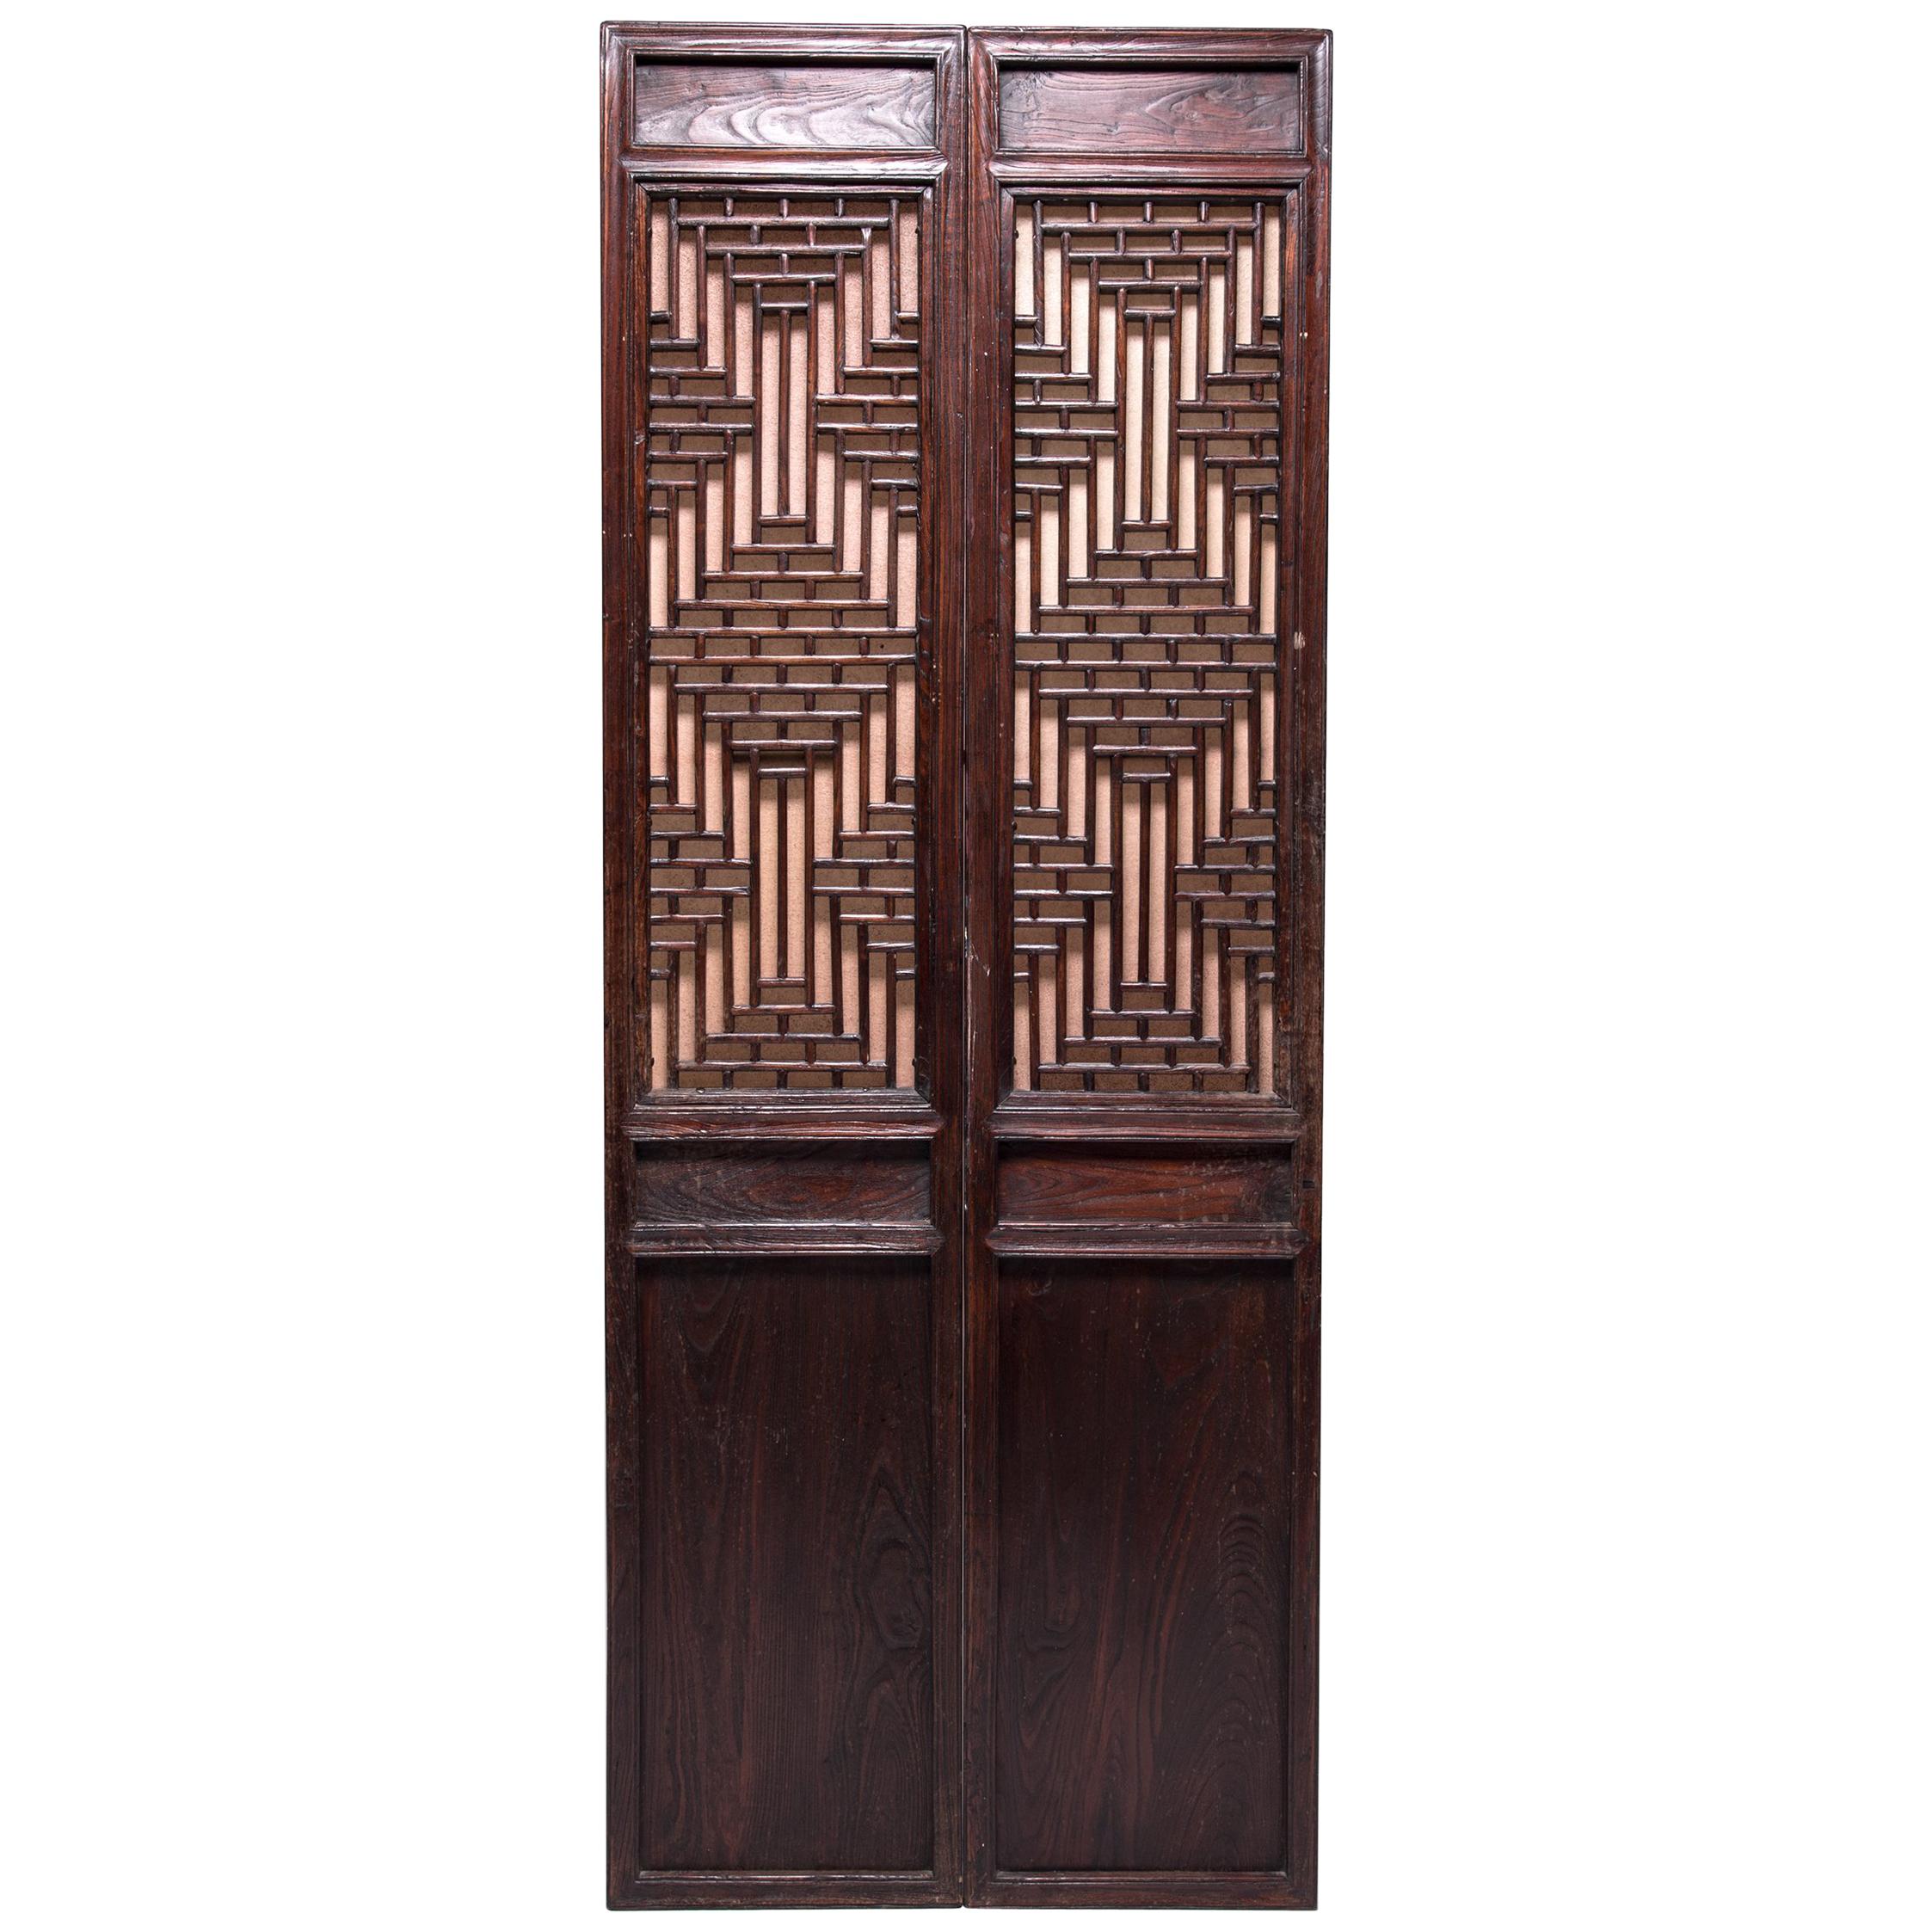 Pair of Chinese Turned Square Courtyard Panels, c. 1850 For Sale